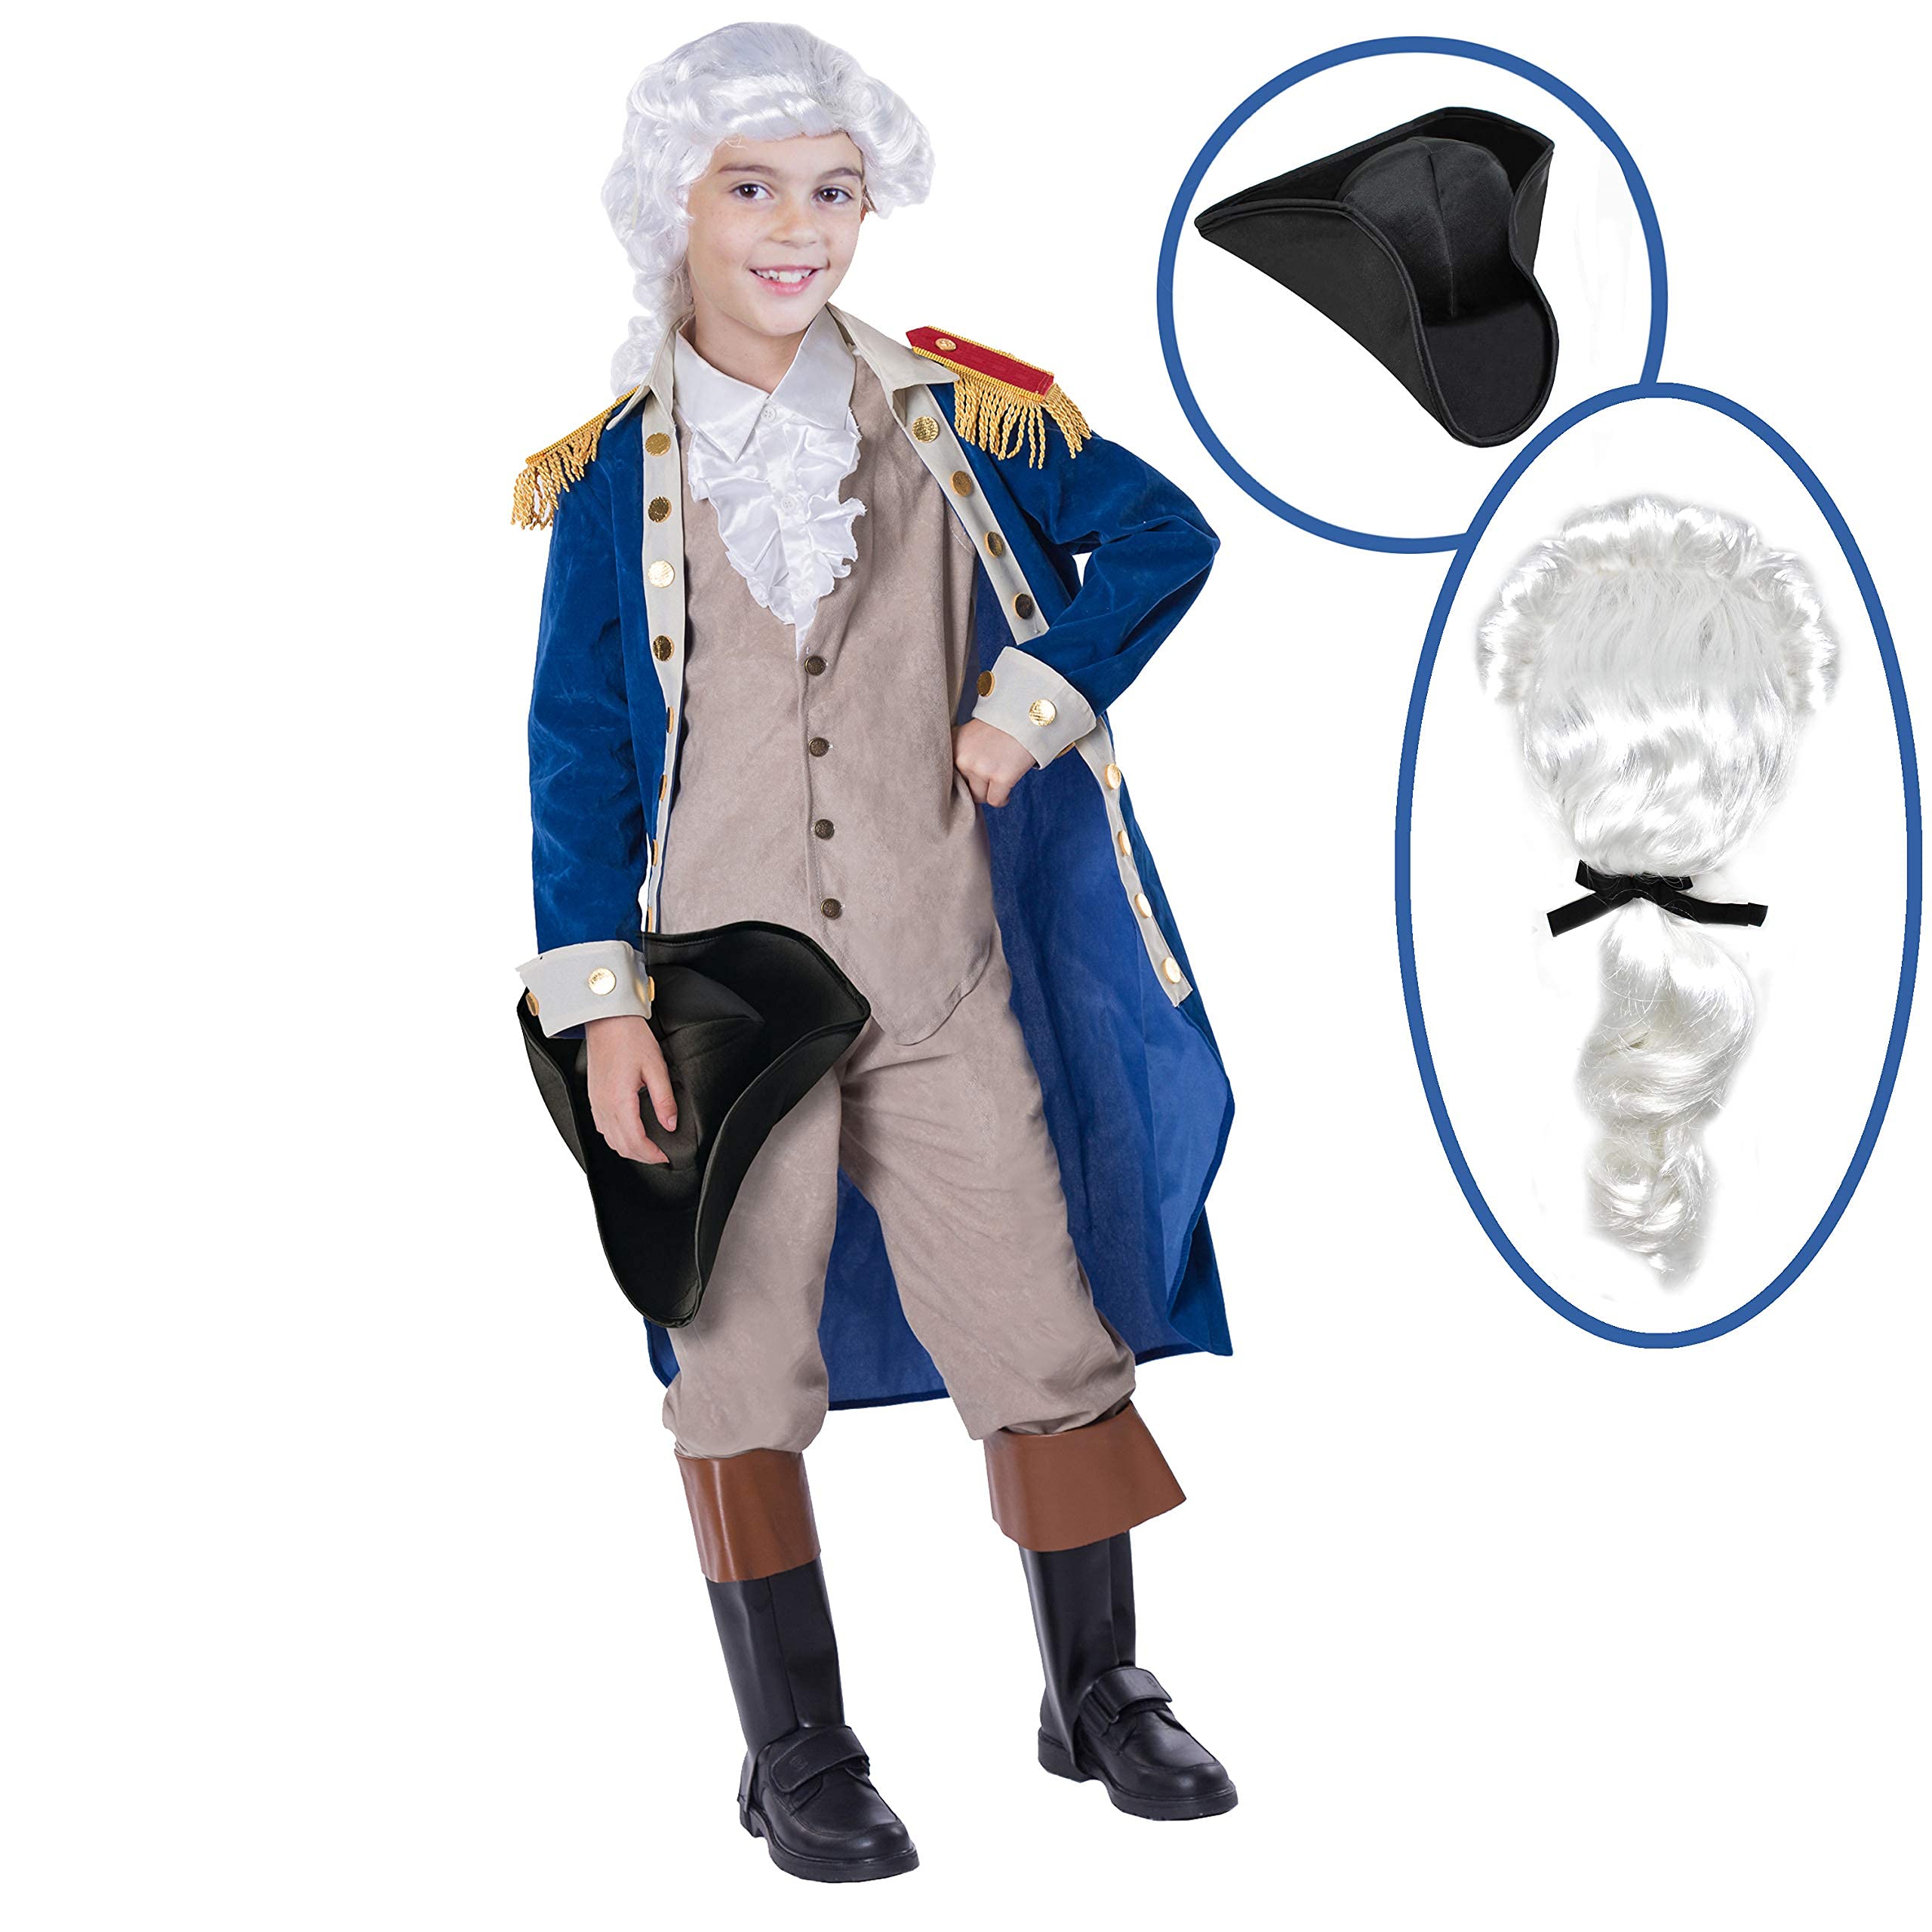 Spooktacular Creations George Washington Colonial Boys Costume Set with Wig and Hat for Halloween Dress Up Party